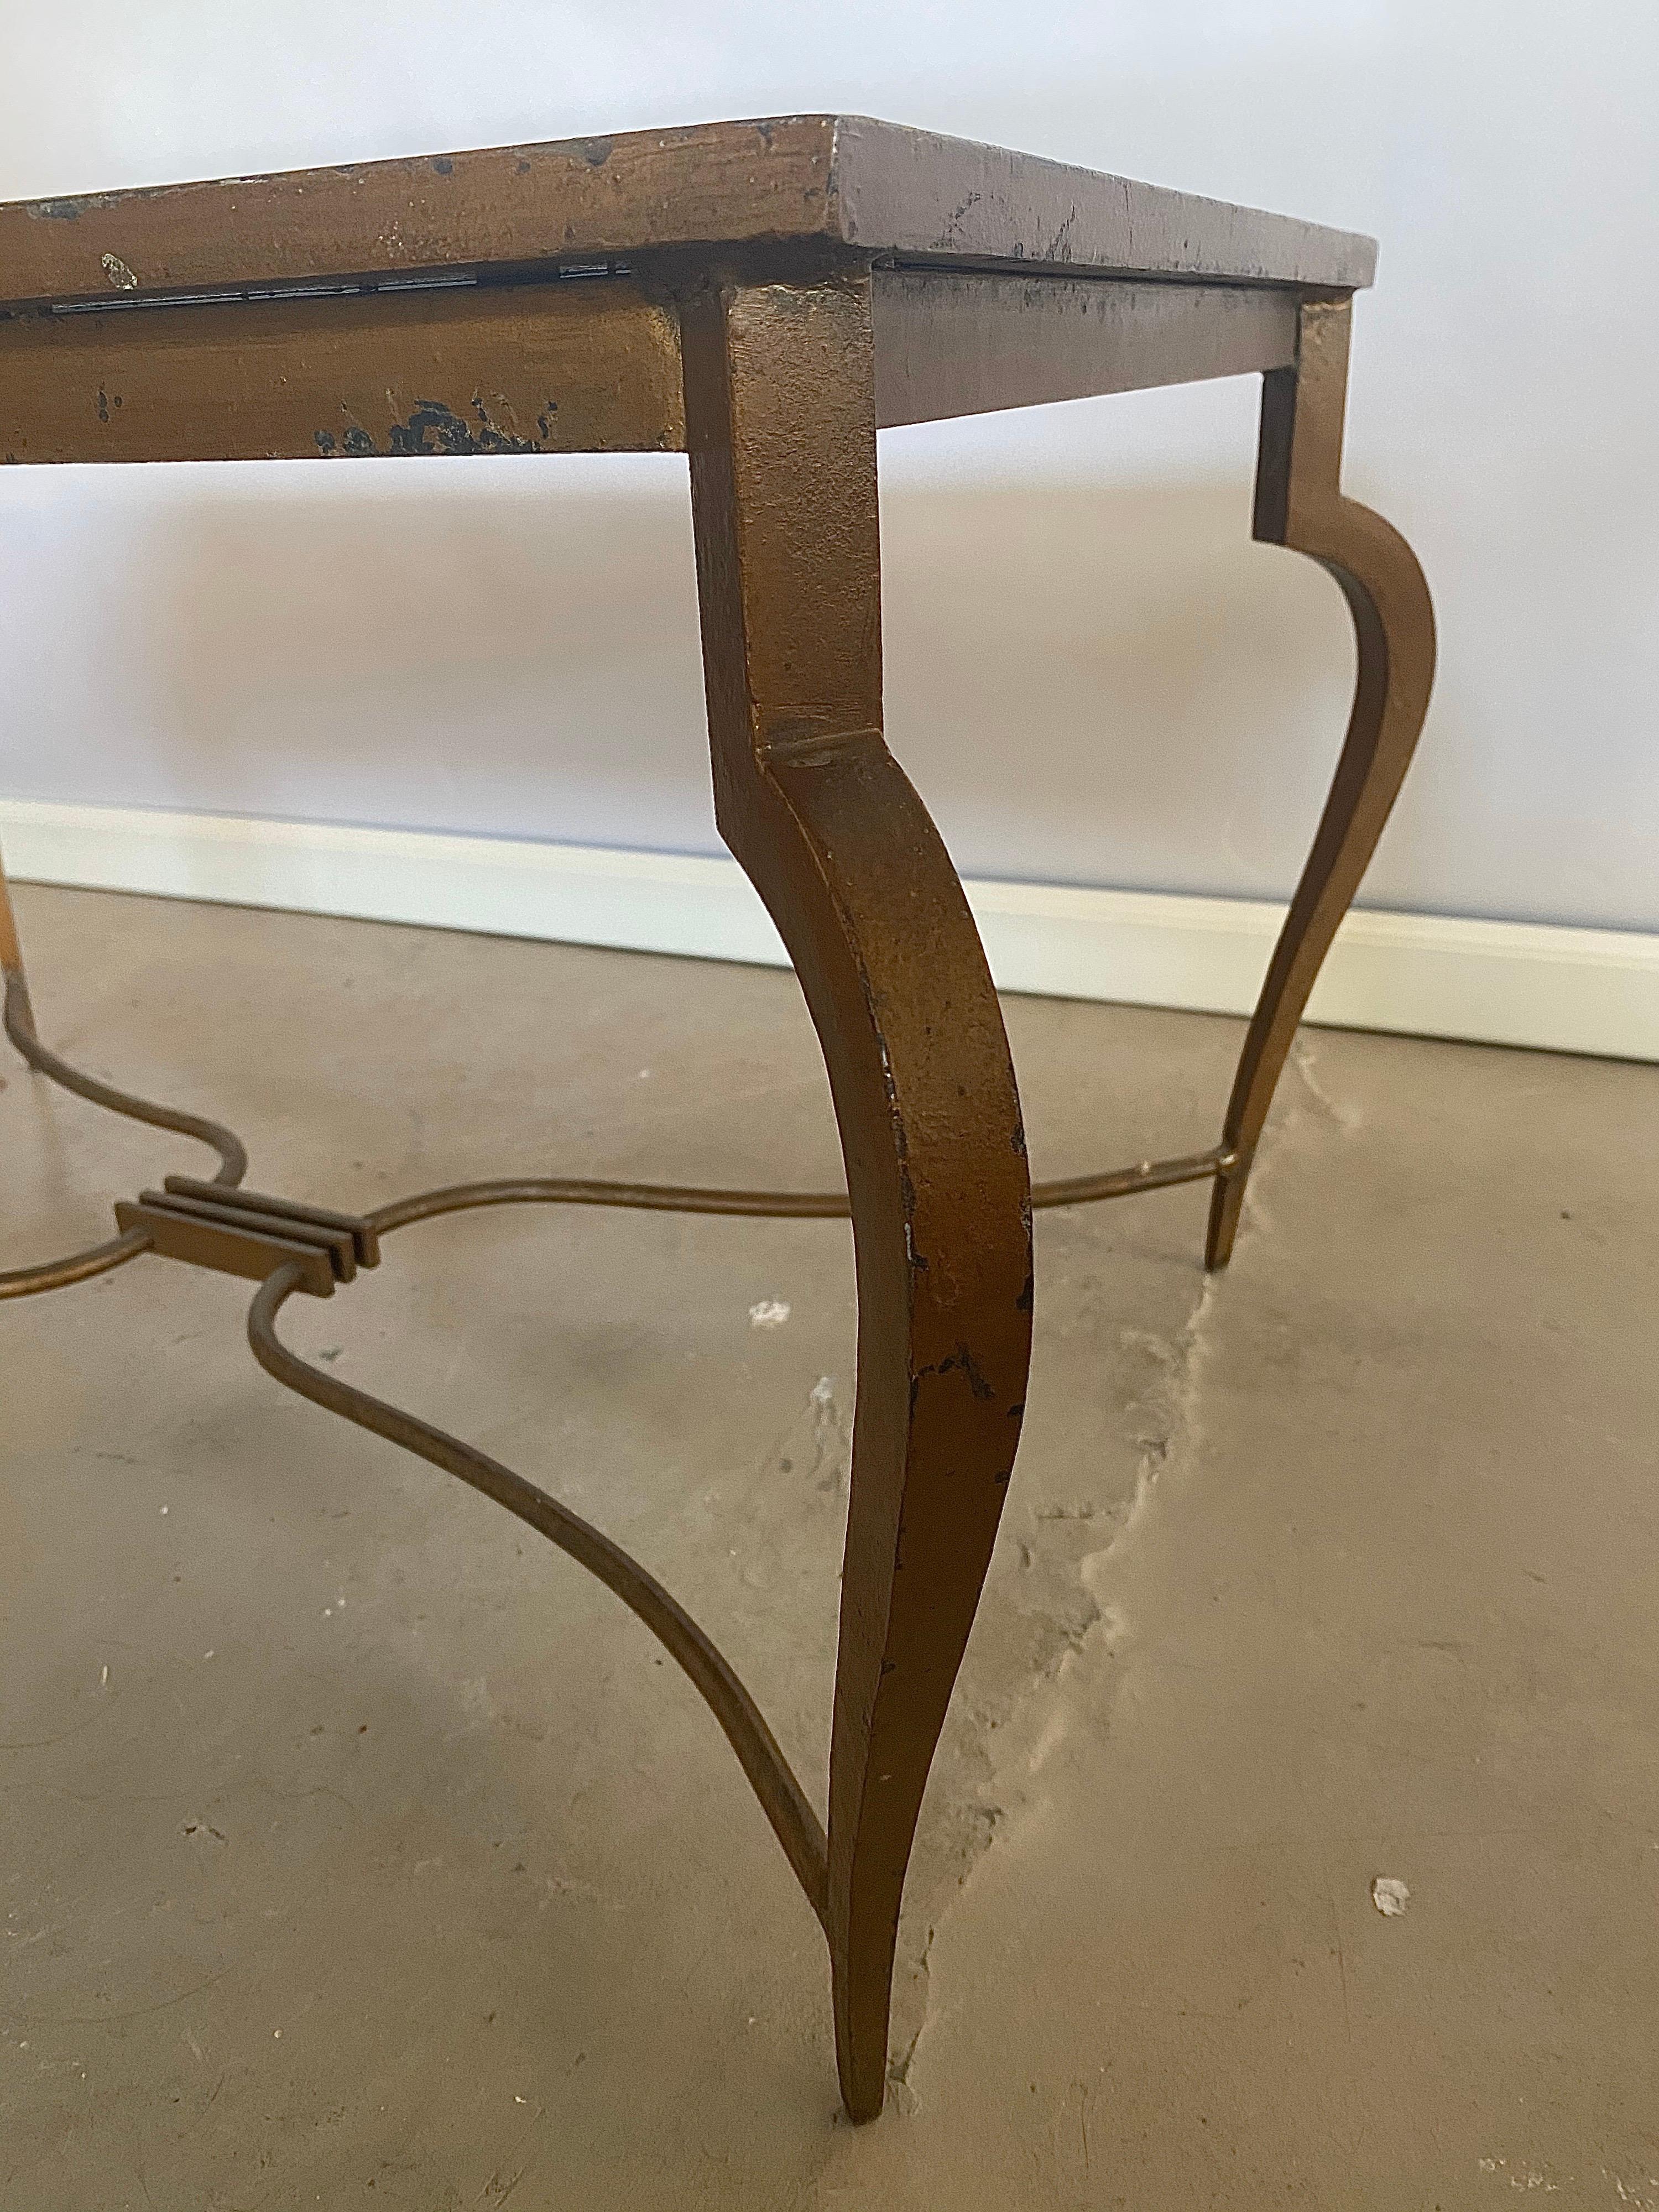 Mirrored René Prou Coffee or Cocktail Table in Gold Painted Forged Iron, 1940s For Sale 1